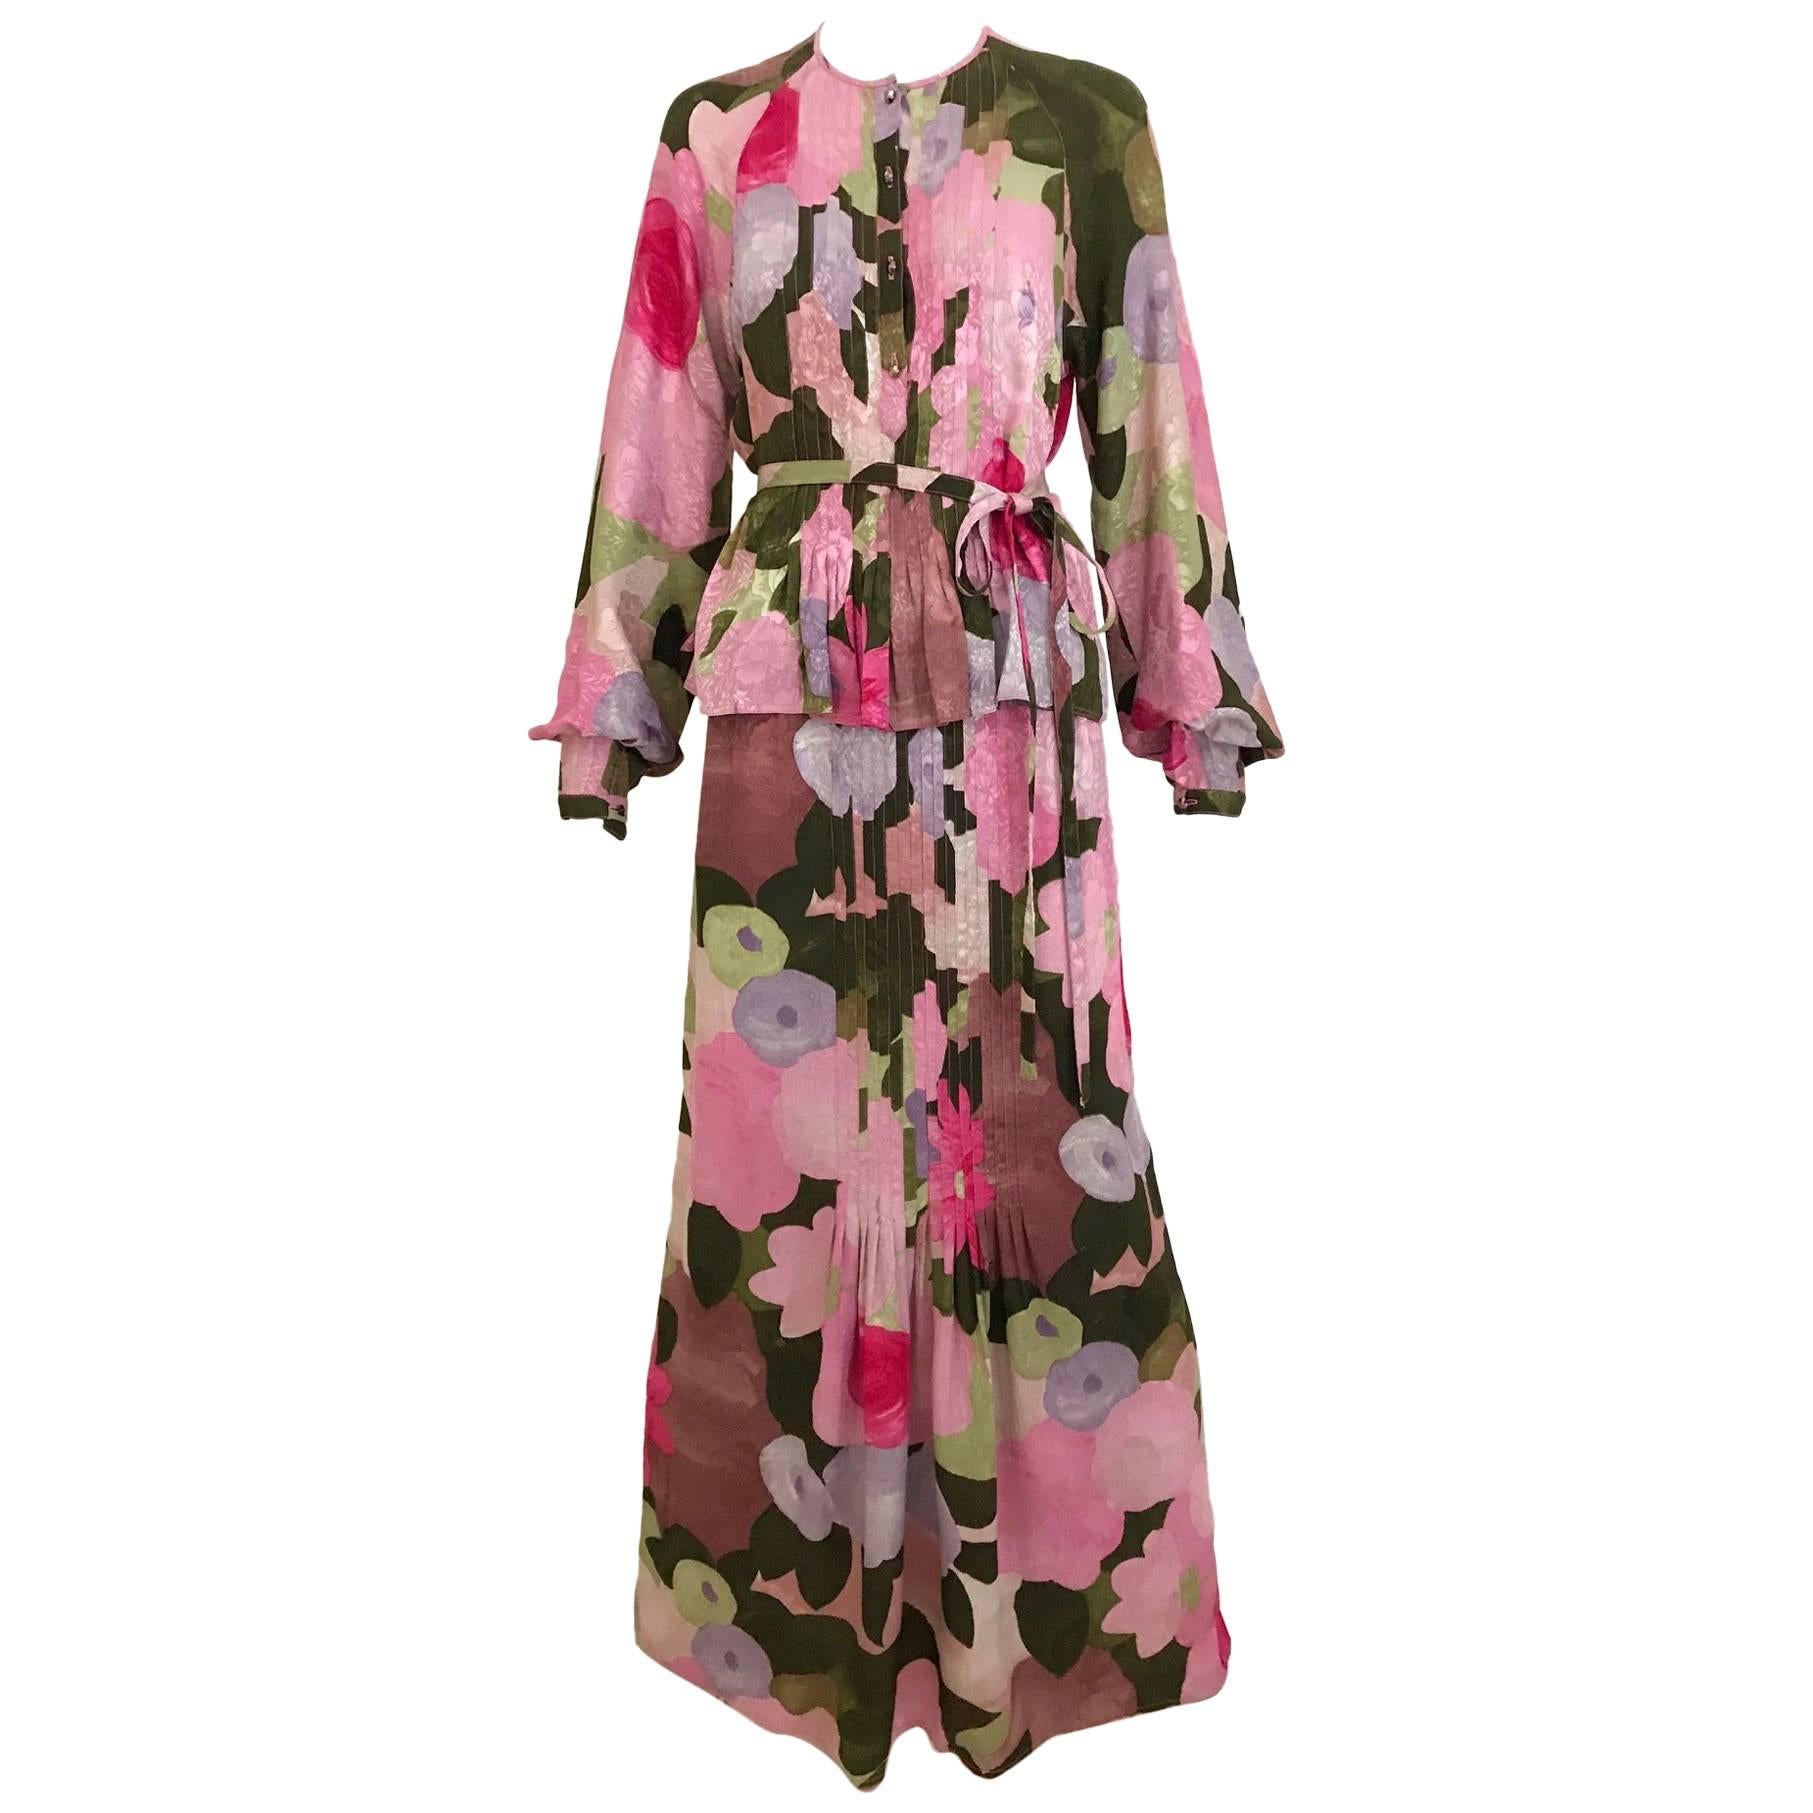 1970s Geoffrey Beene pink and green floral print silk ensemble